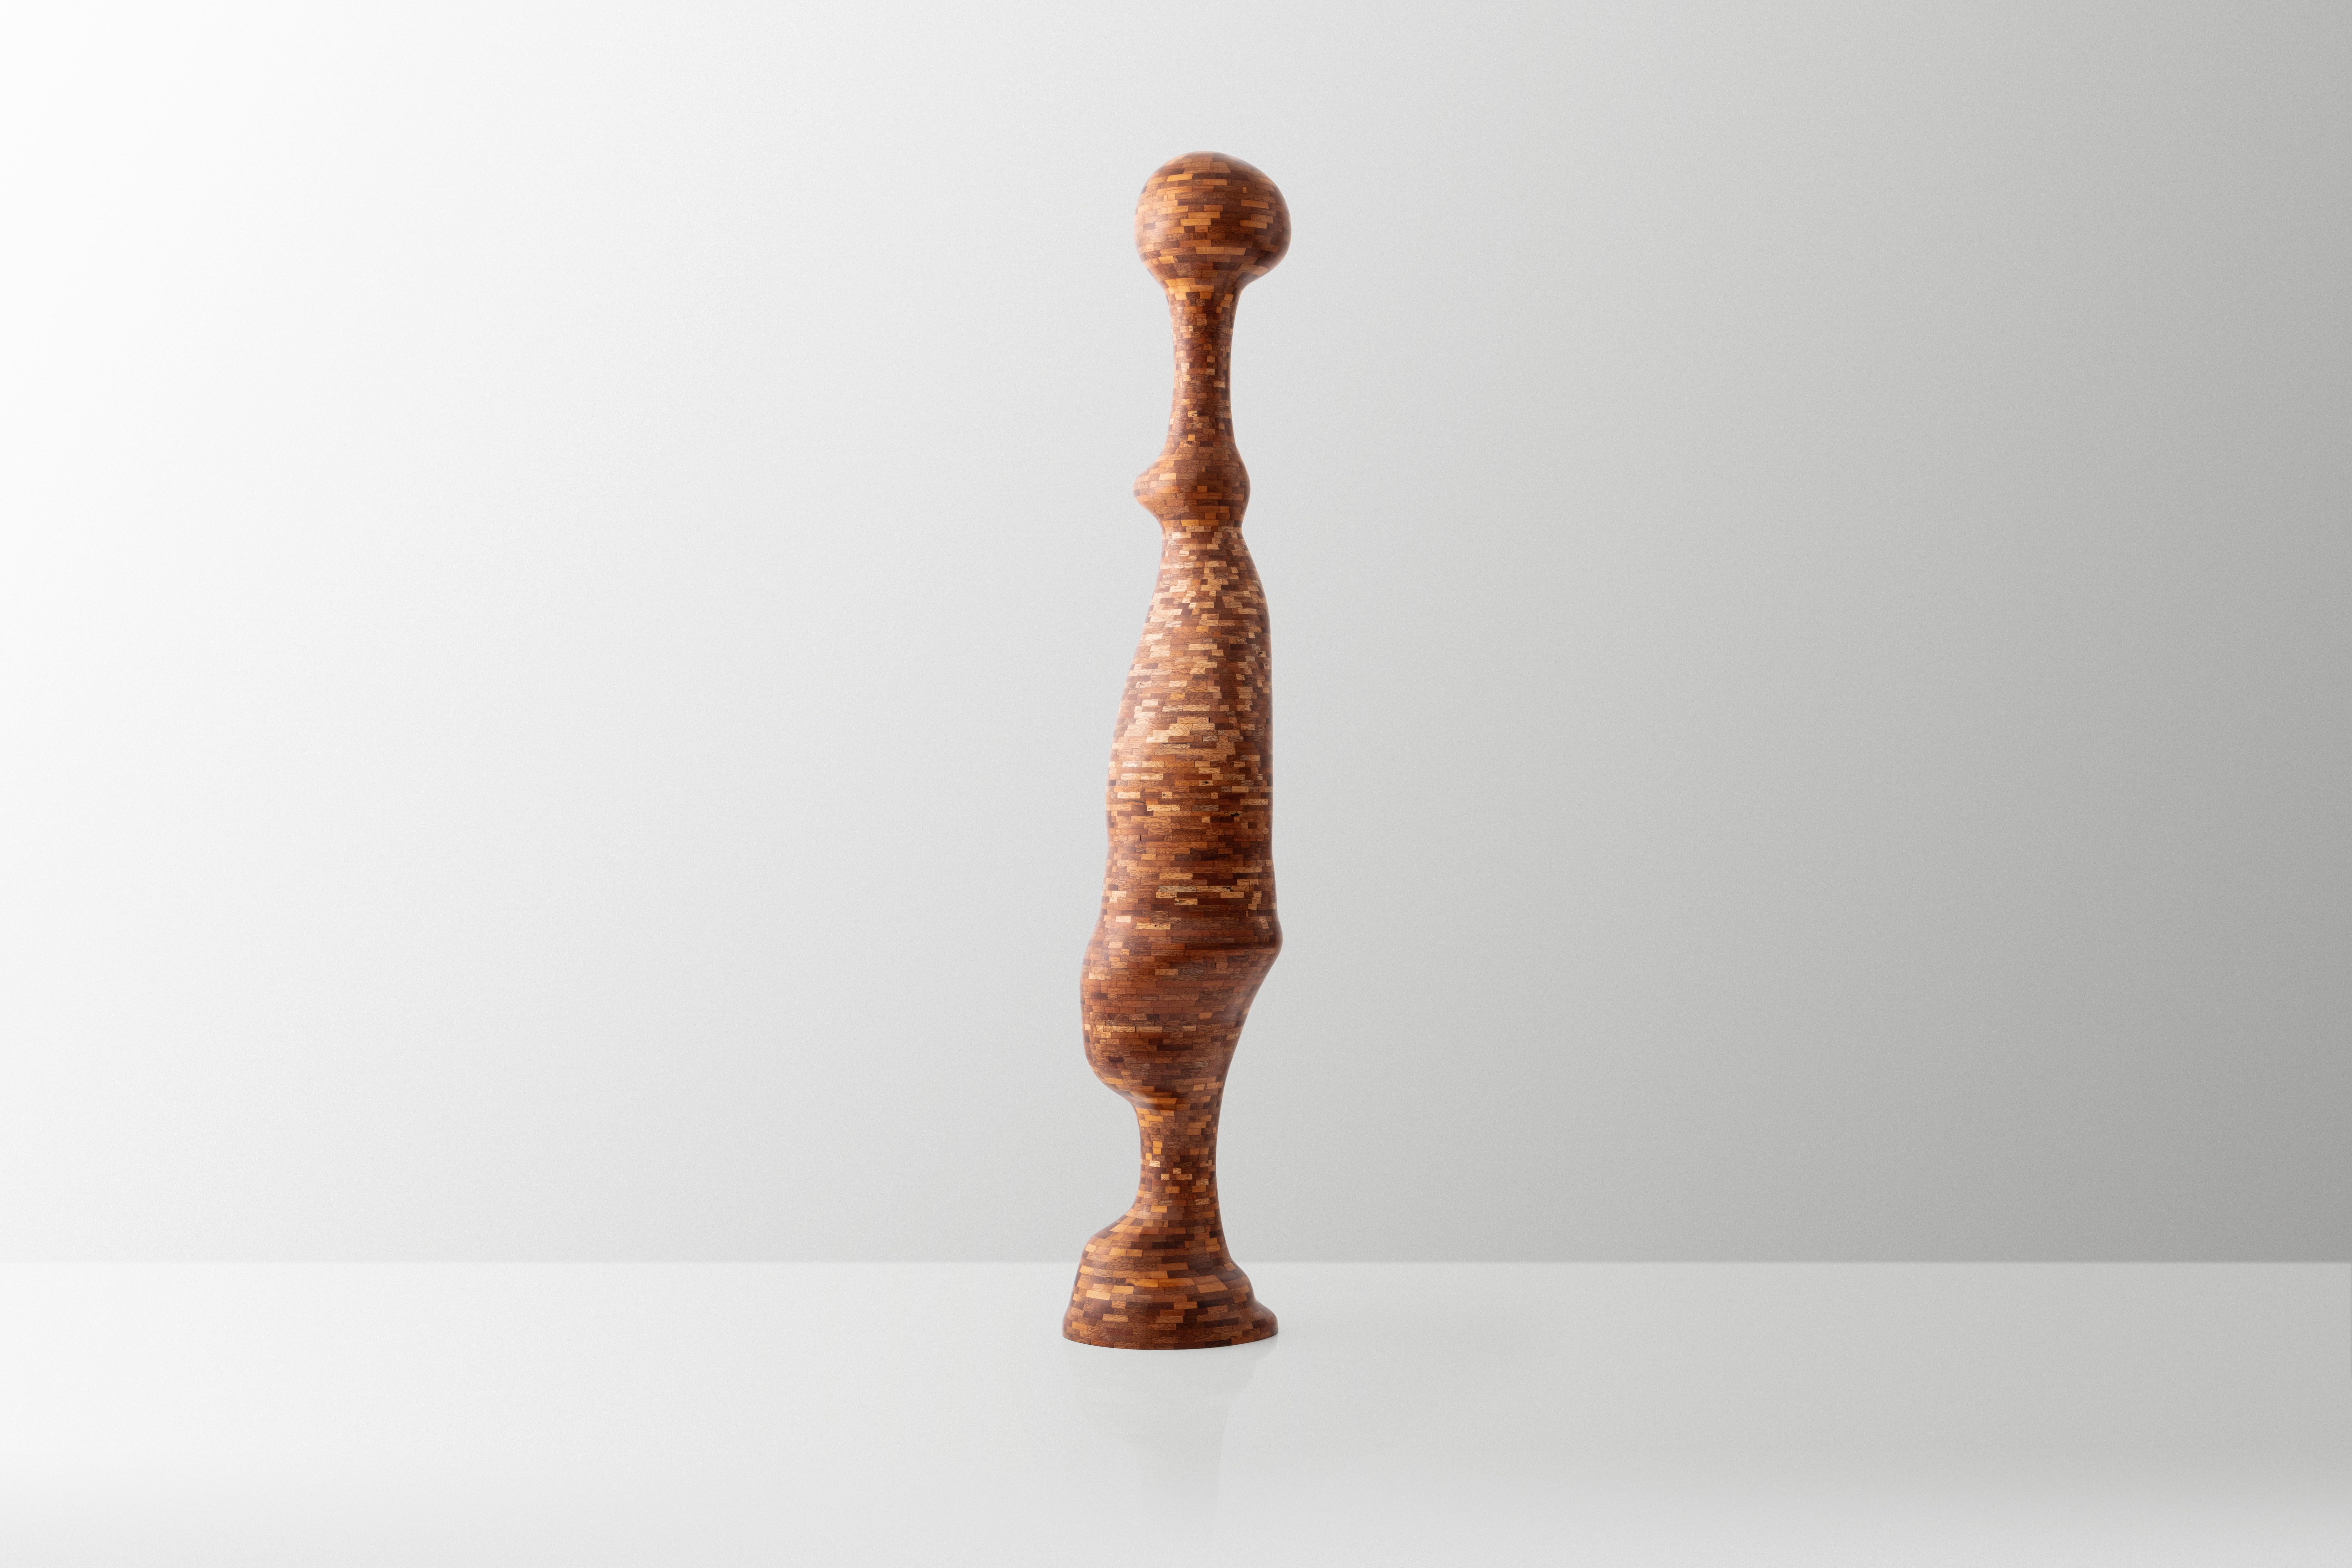 This is Richard's third free-form exploration using his signature STACKED style. As with all of his work, this sculpture was built, sculpted, and finished entirely by hand. To the confusion of many, there is no lathe work involved. The desired